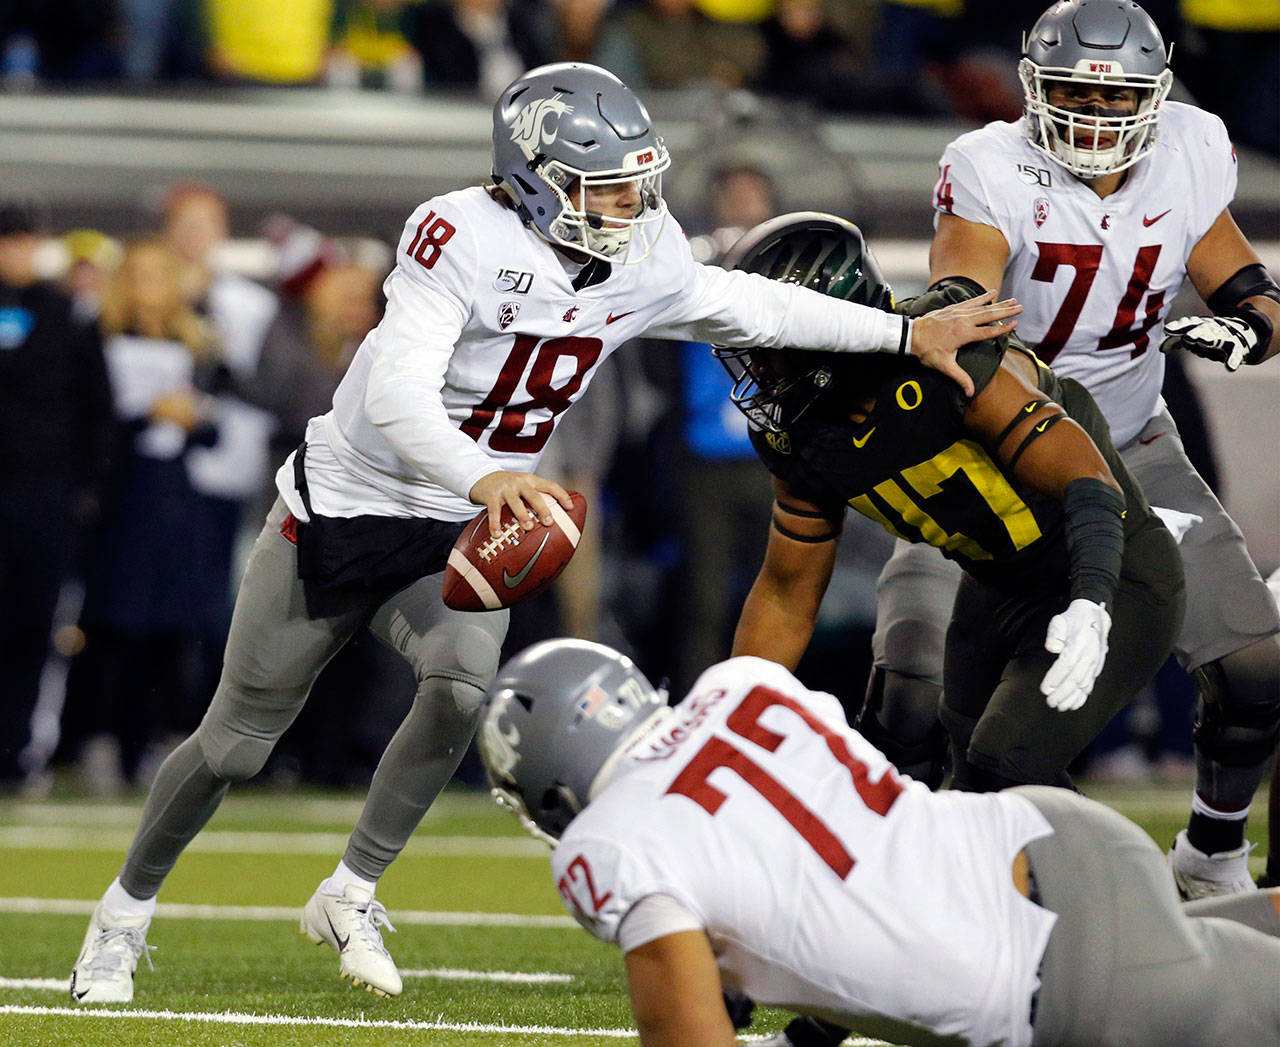 Washington State quarterback Anthony Gordon (18) scrambles as he tries to avoid a sack by Oregon linebacker Mase Funa during the second quarter on Oct. 27, 2019 at Autzen Stadium. (Andy Nelson | The Register-Guard)